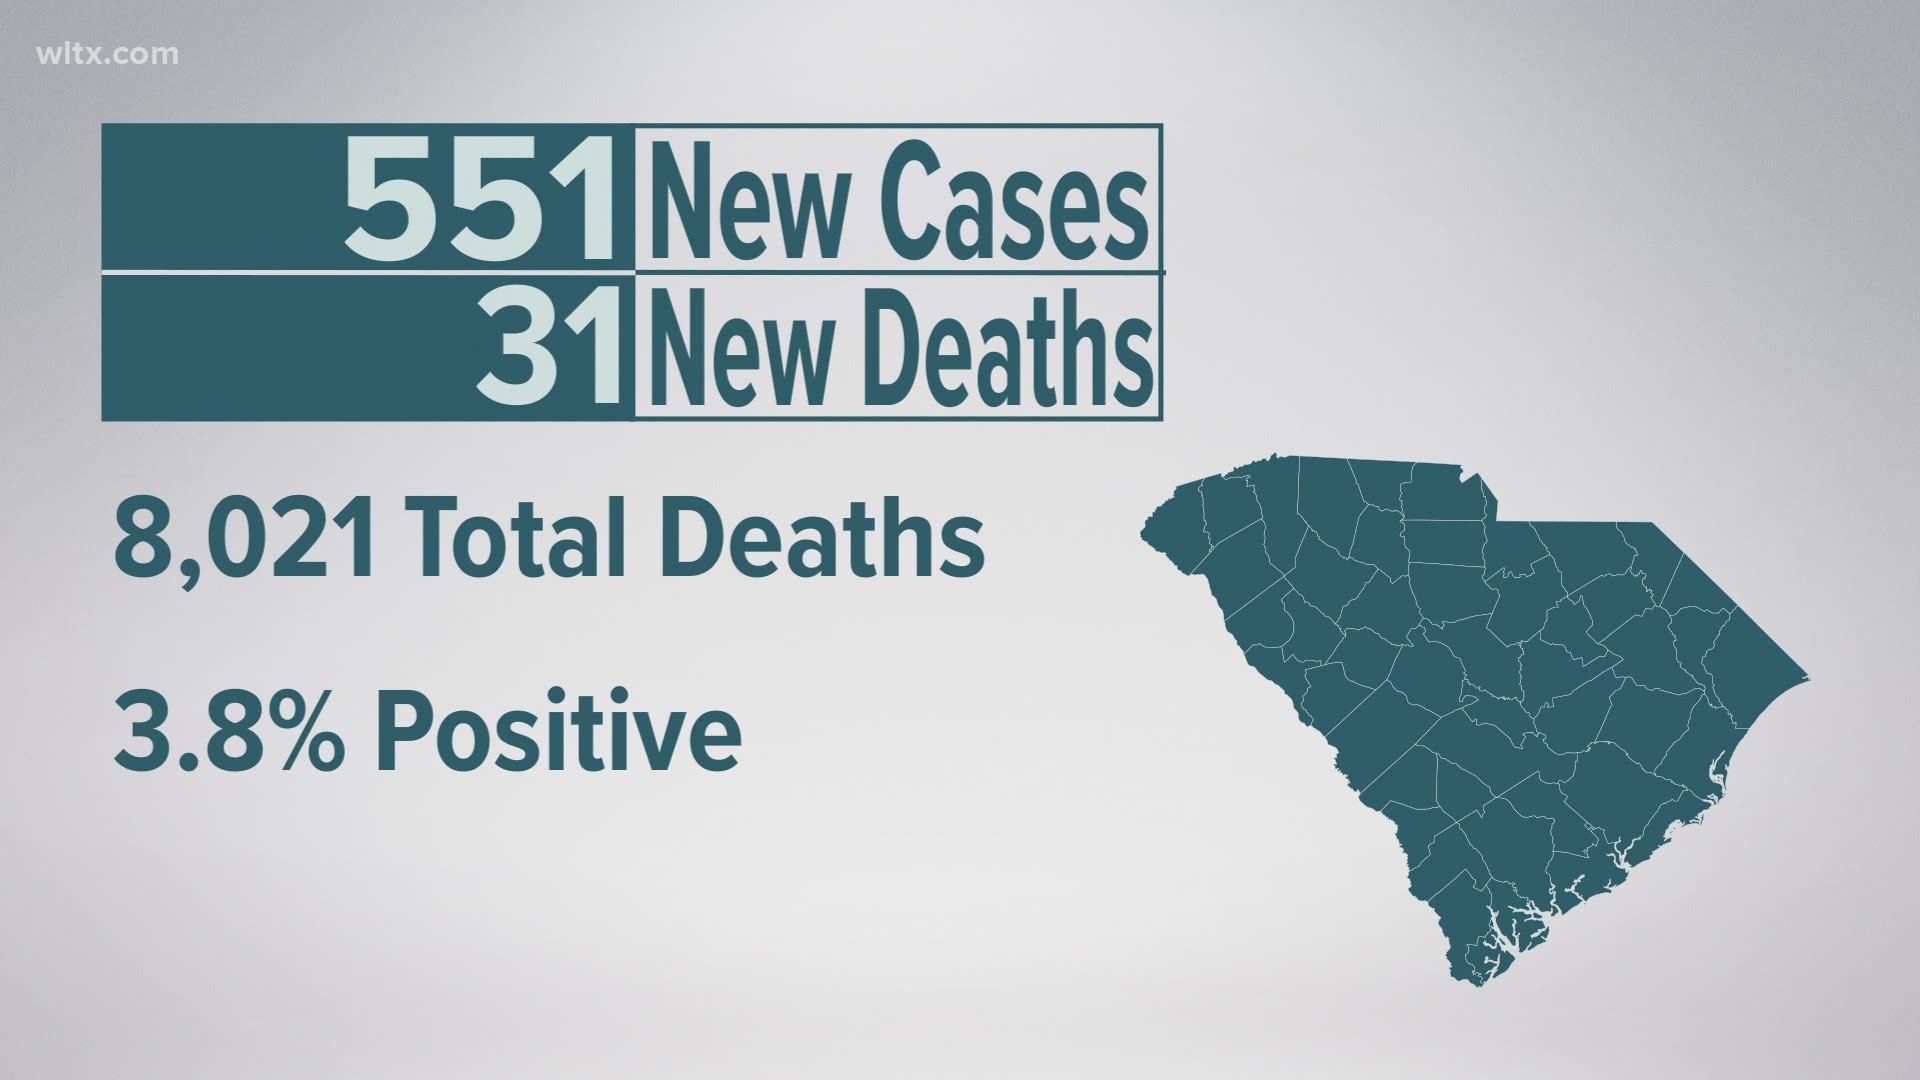 31 additional deaths reported today brings total to 8,021; 551 new cases reported Thursday, March 25, 2021